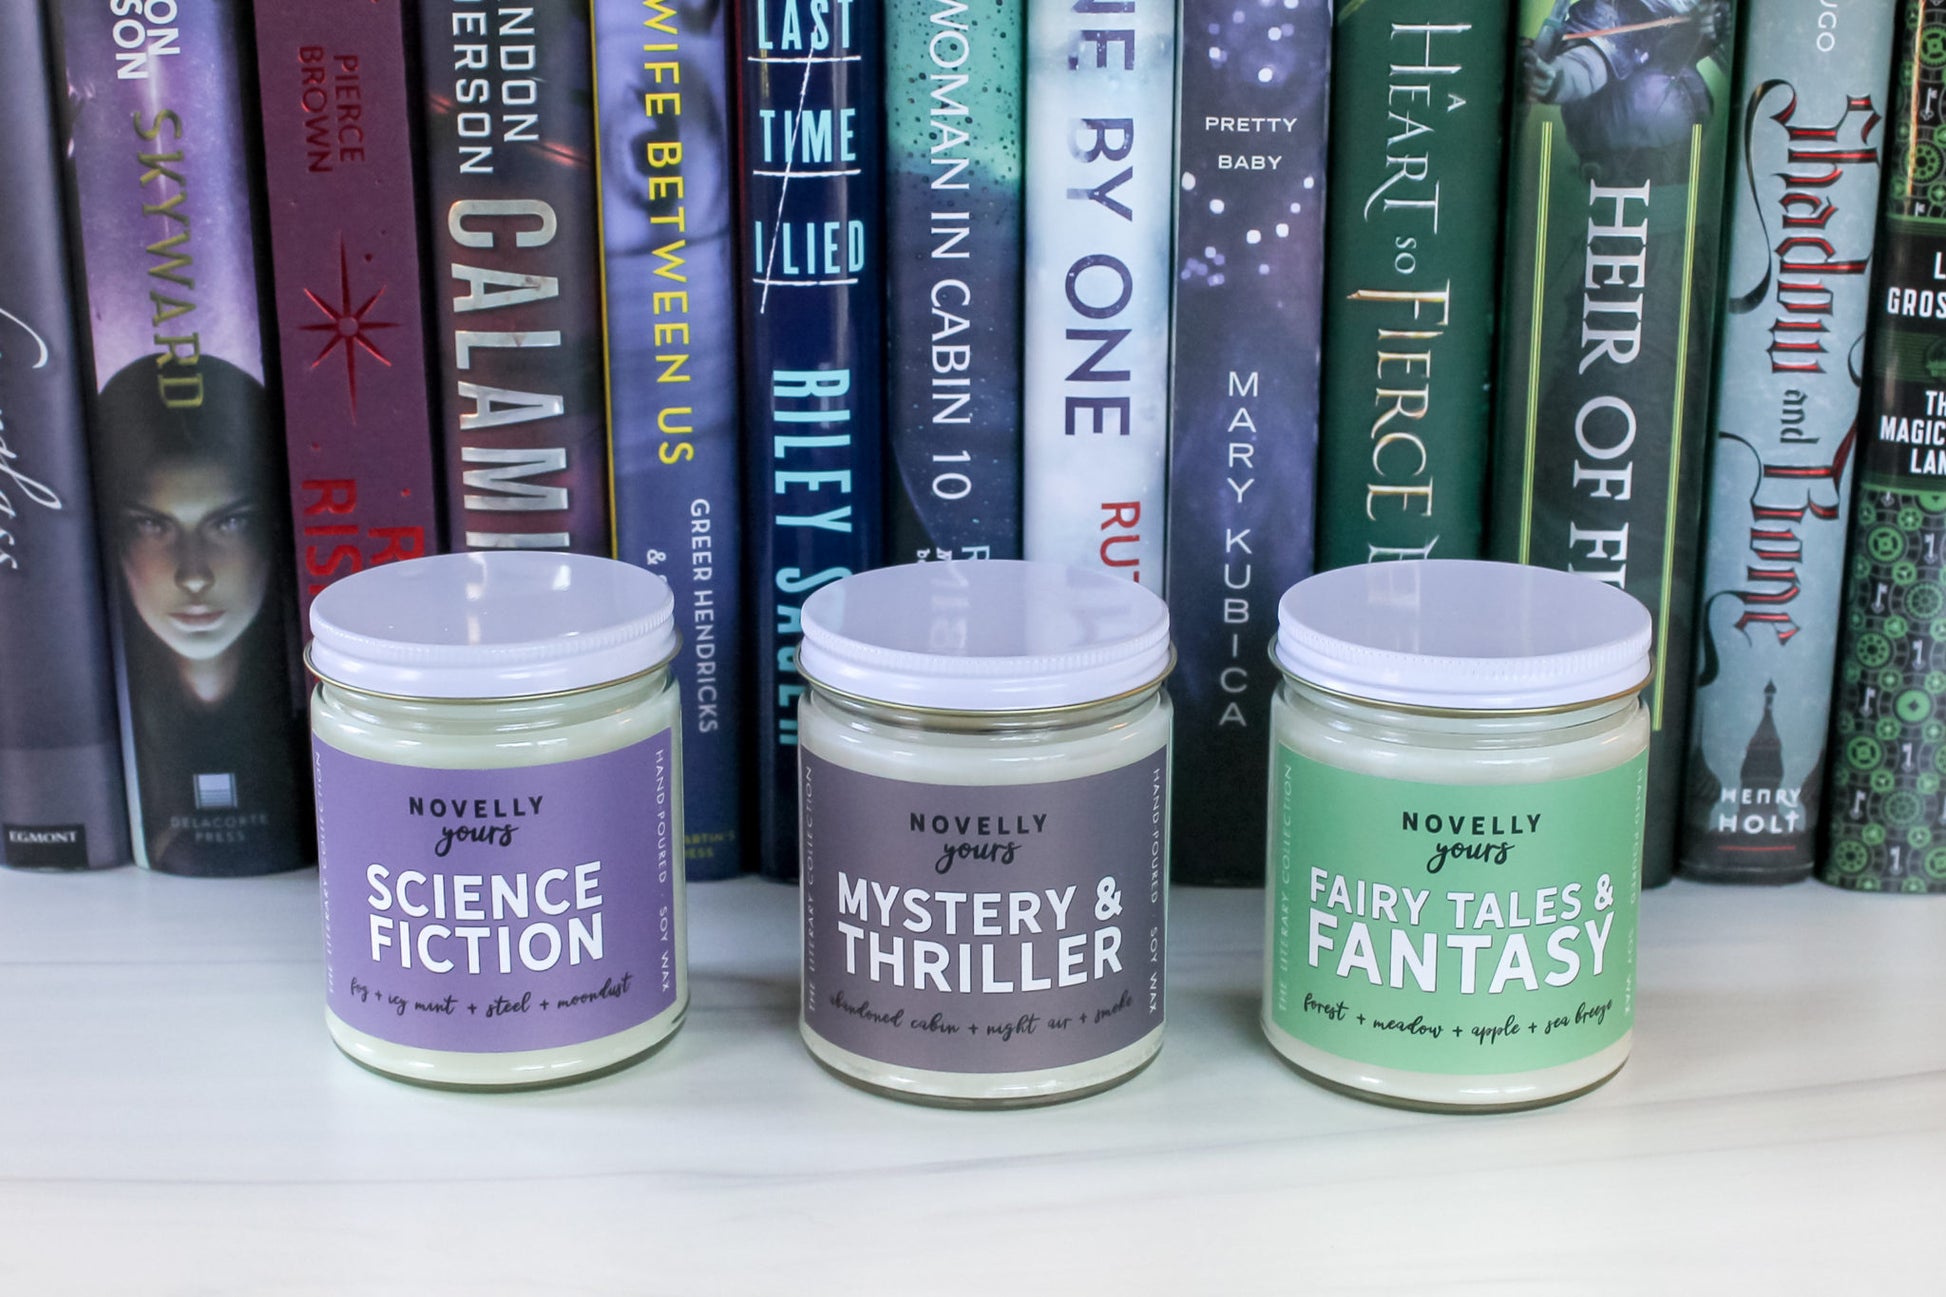 literary candles sitting in front of book spines of coordination colors